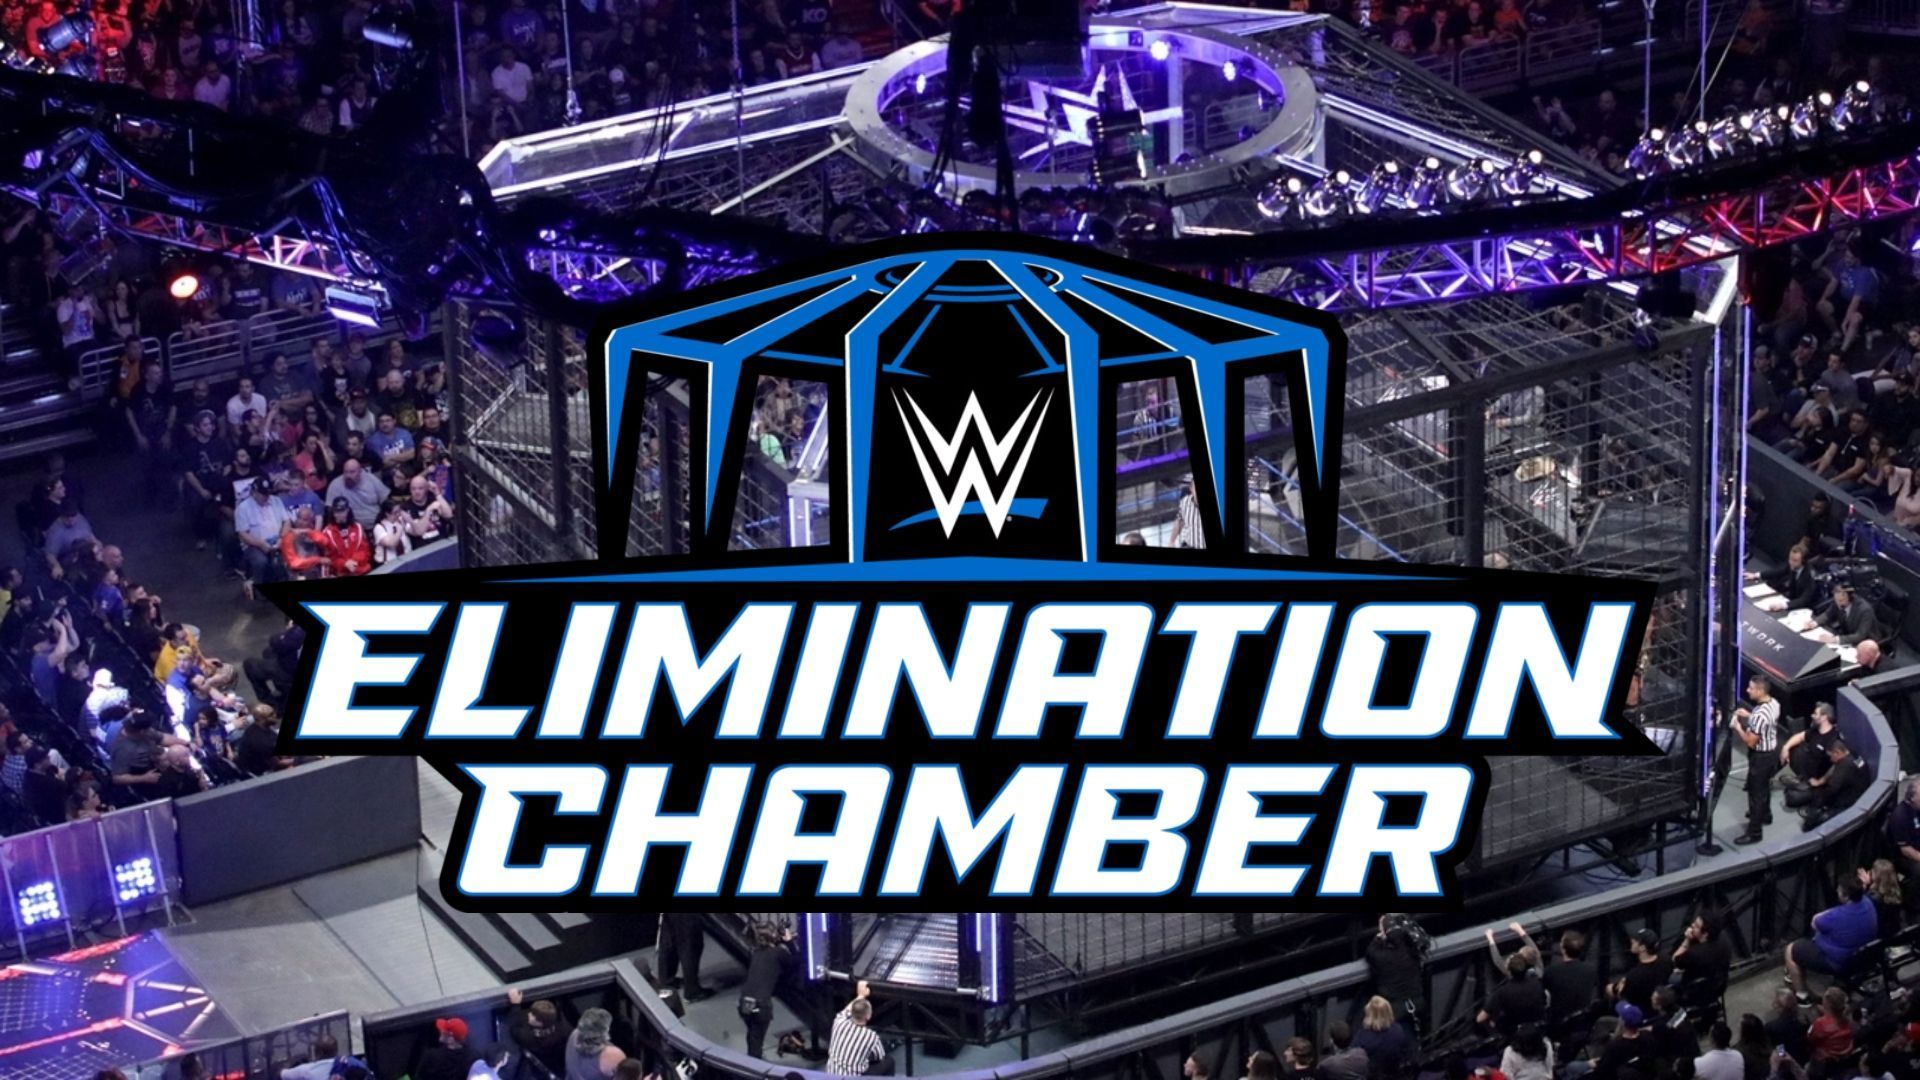 Elimination Chamber will take place on February 18th 2023.